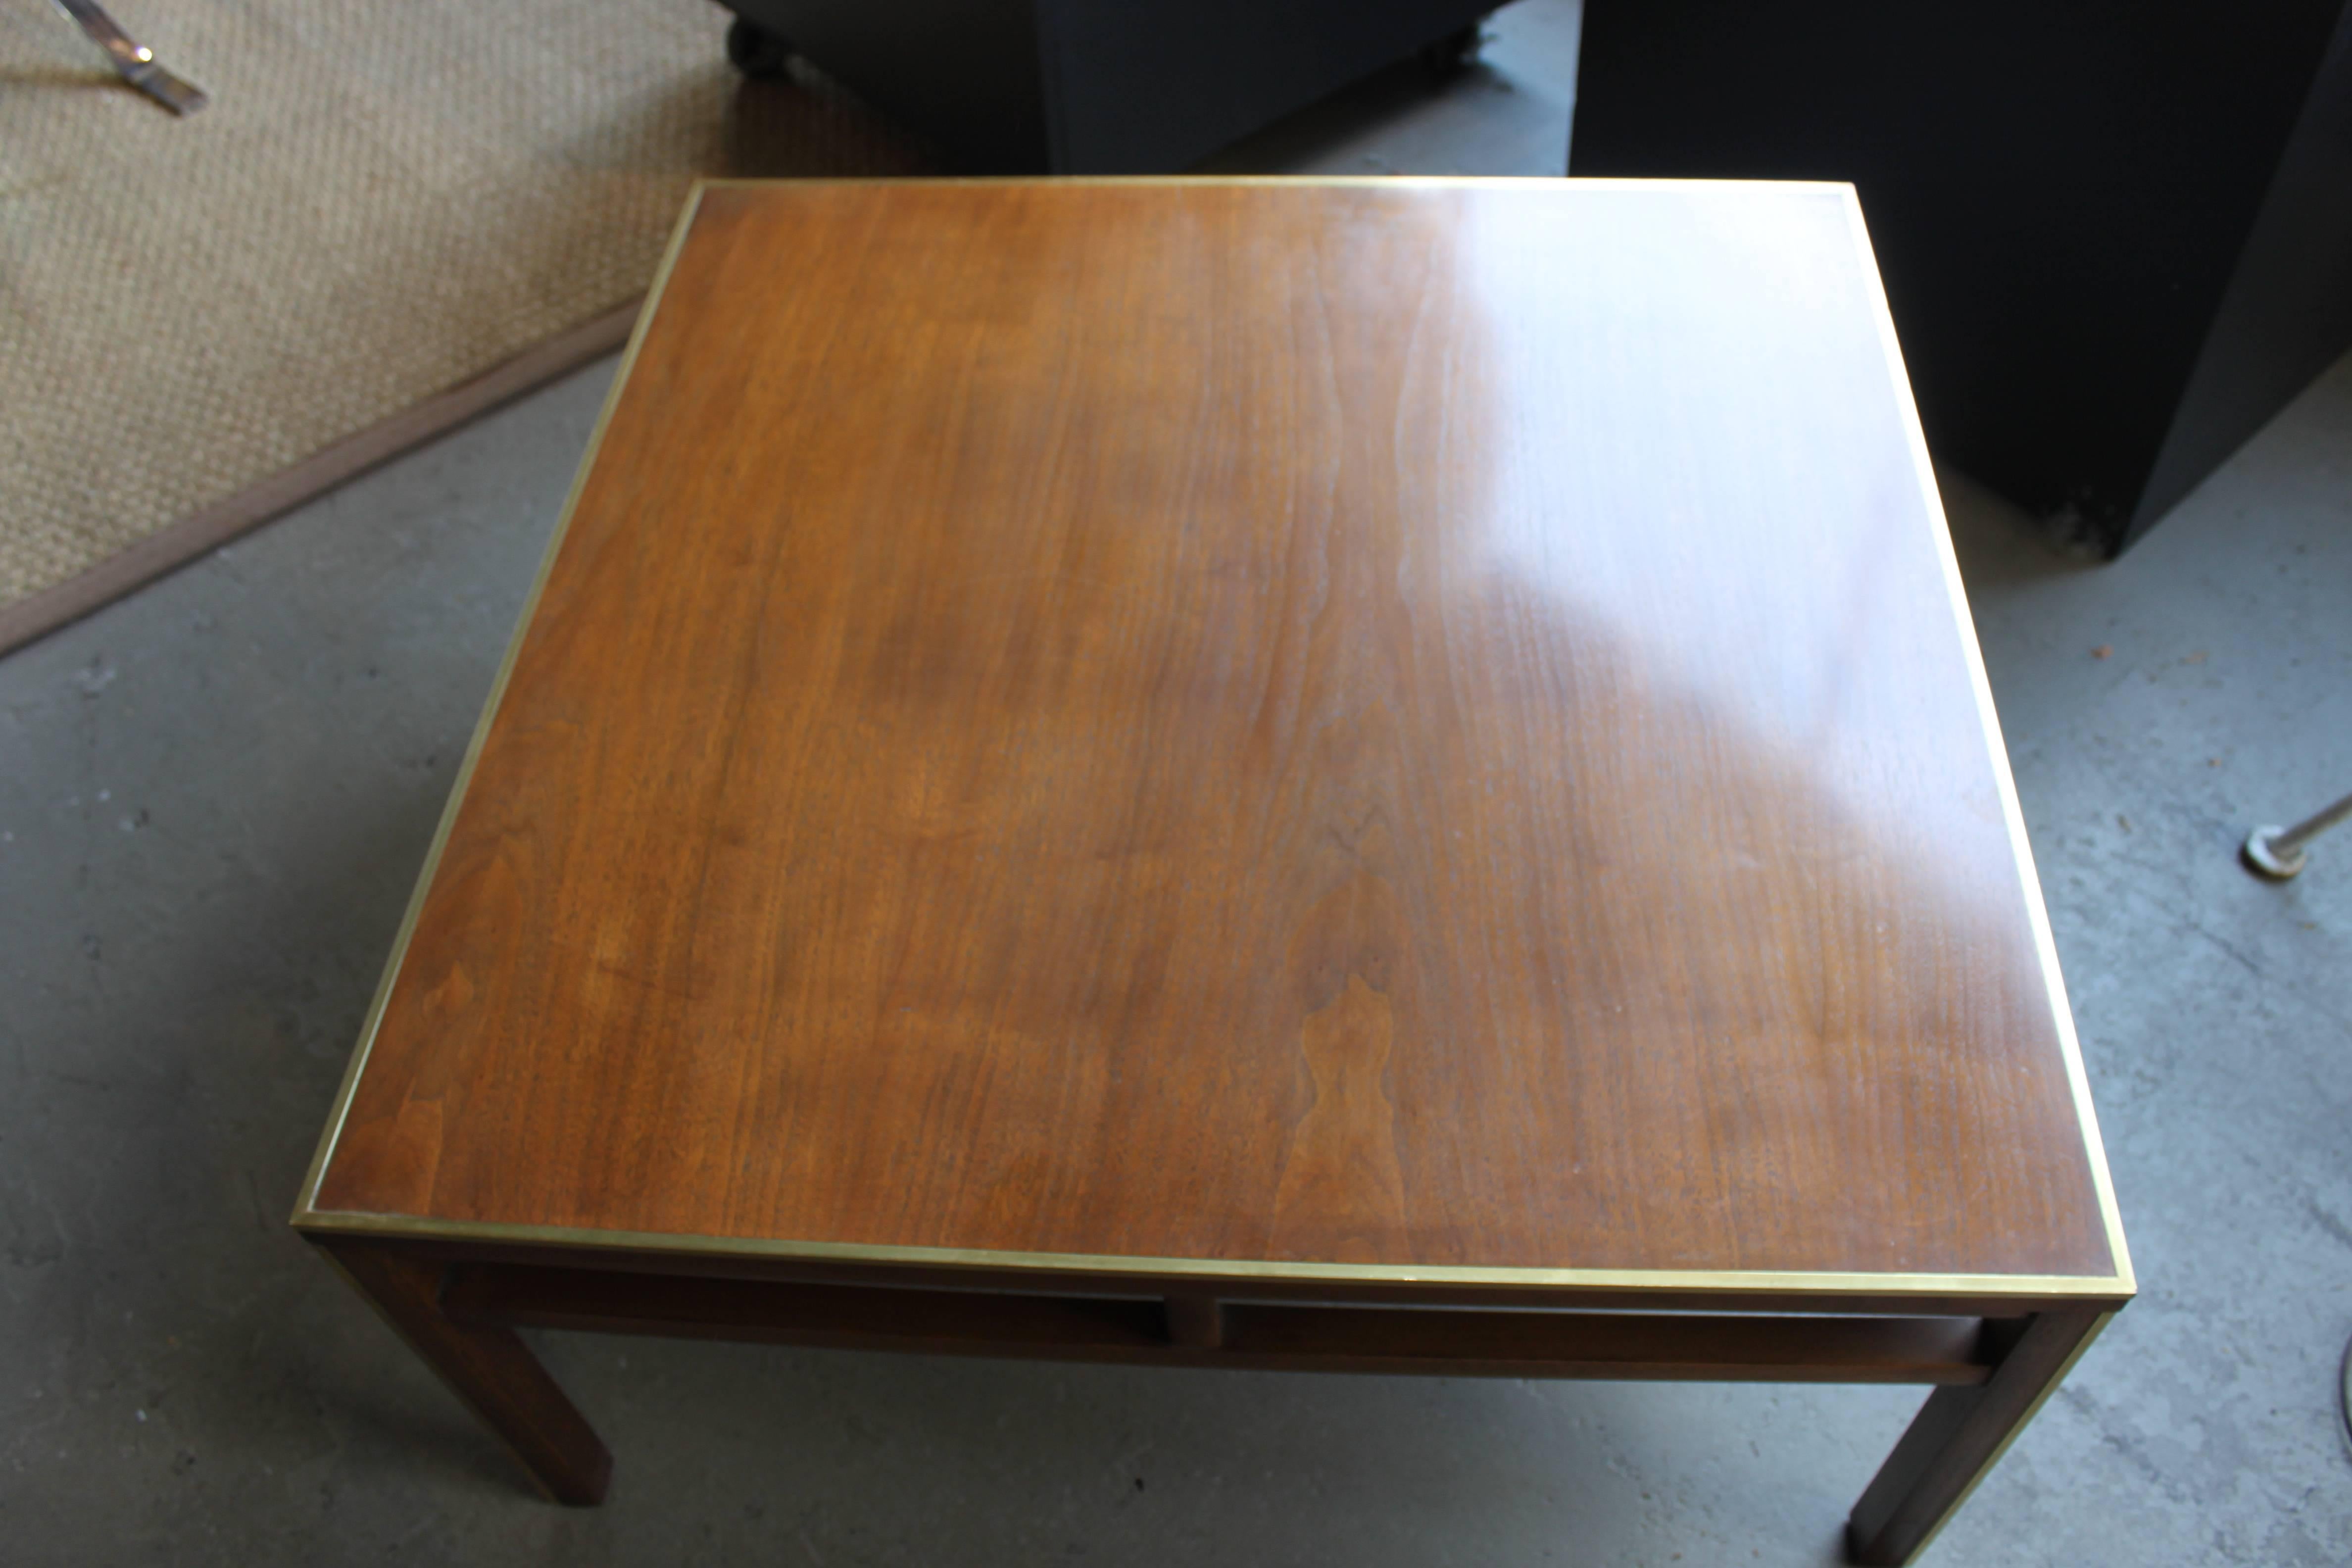 Brass trim coffee table in walnut by Lane. Minor issue with one small indentation on the brass otherwise the table is in very good shape.